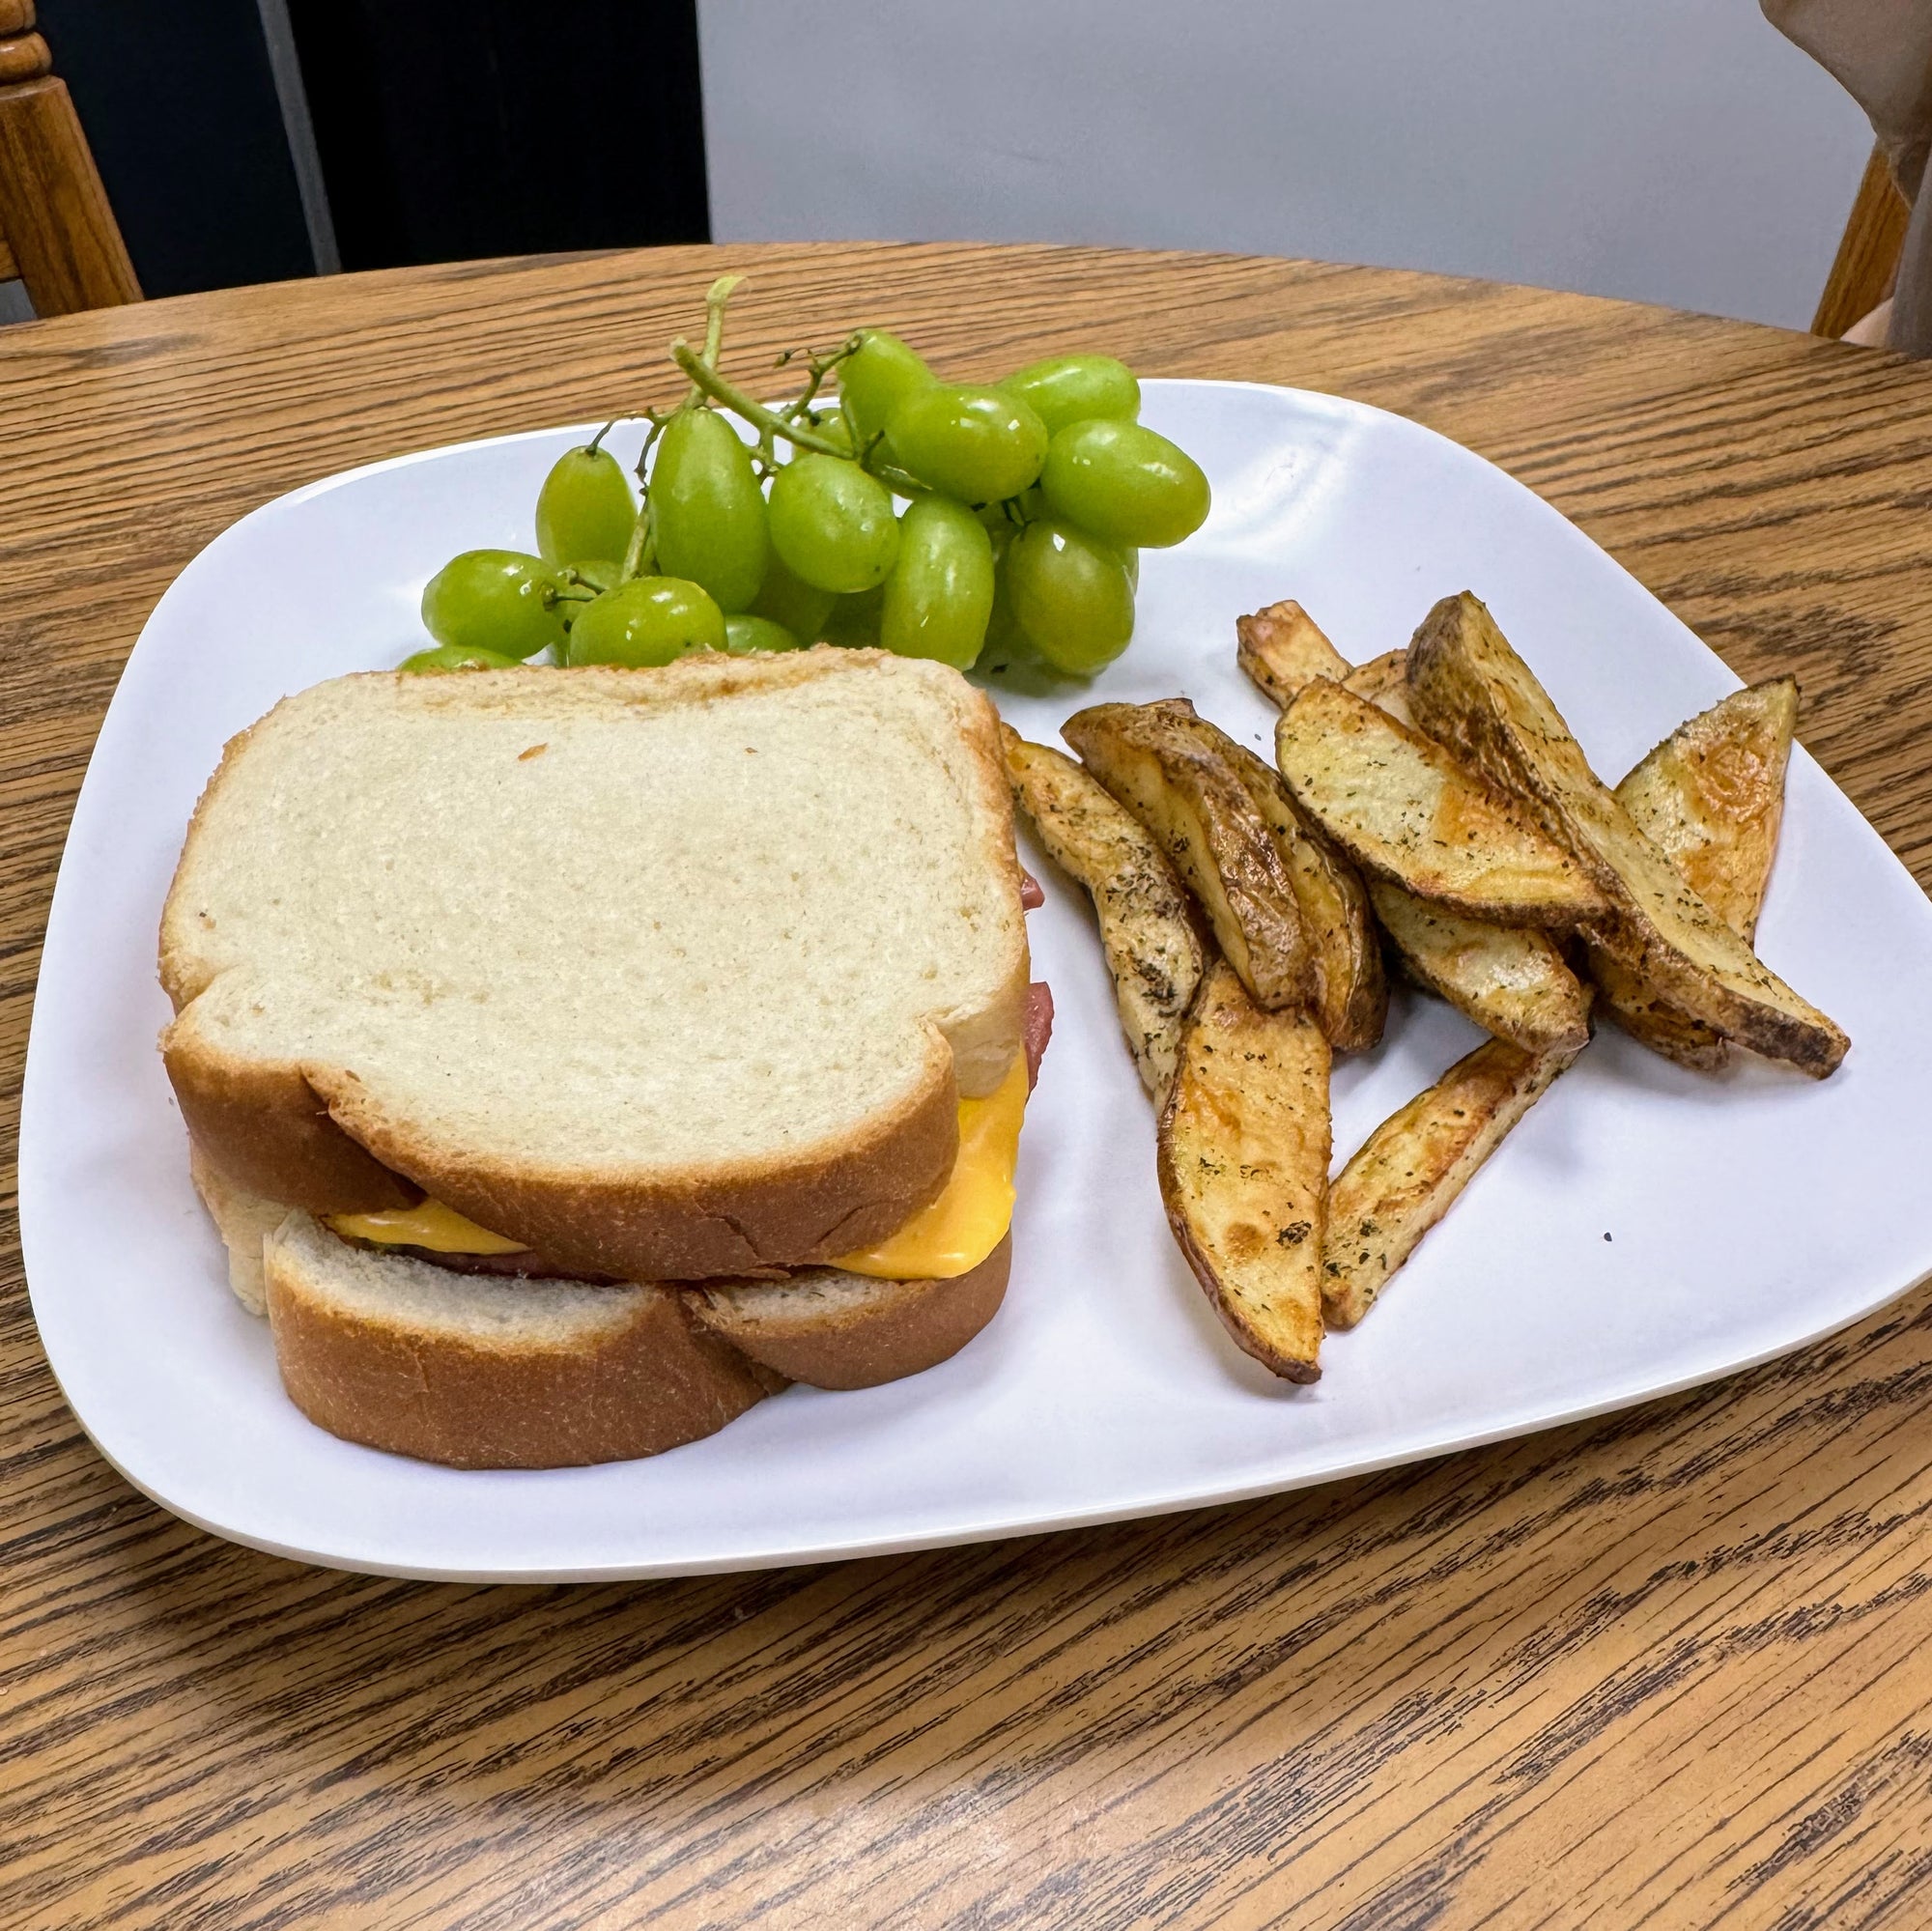 Bright Leaf Bologna Sandwich with Homemade Fries and Grapes